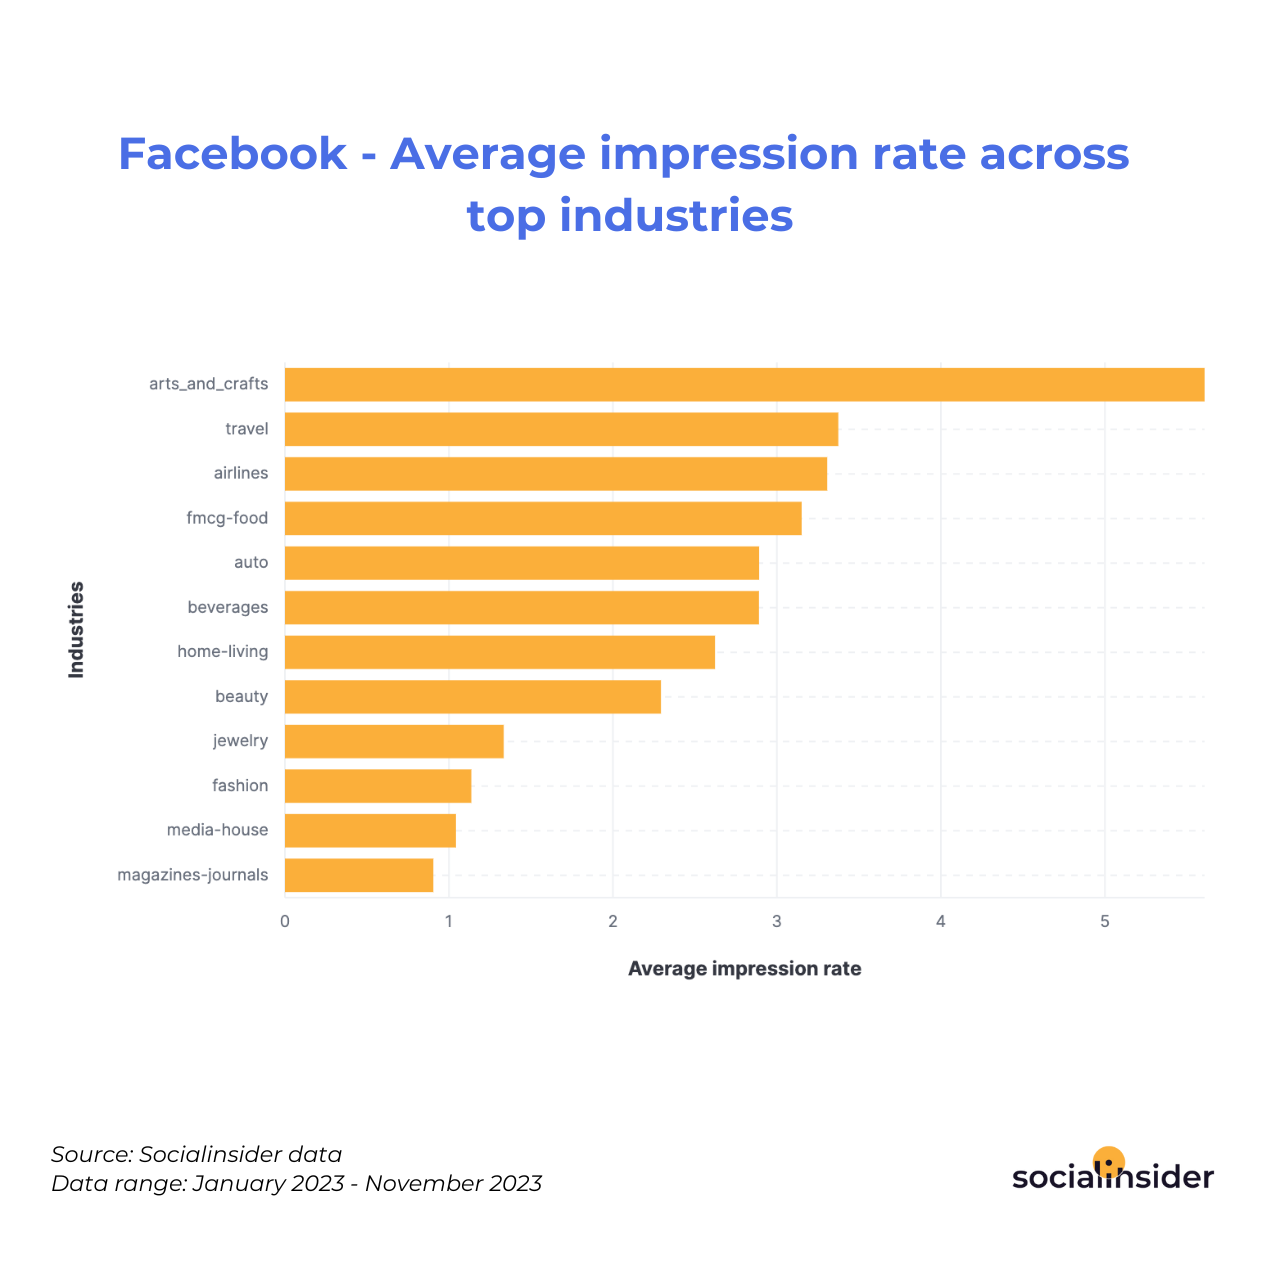 Facebook - Average impression rate across top industries 